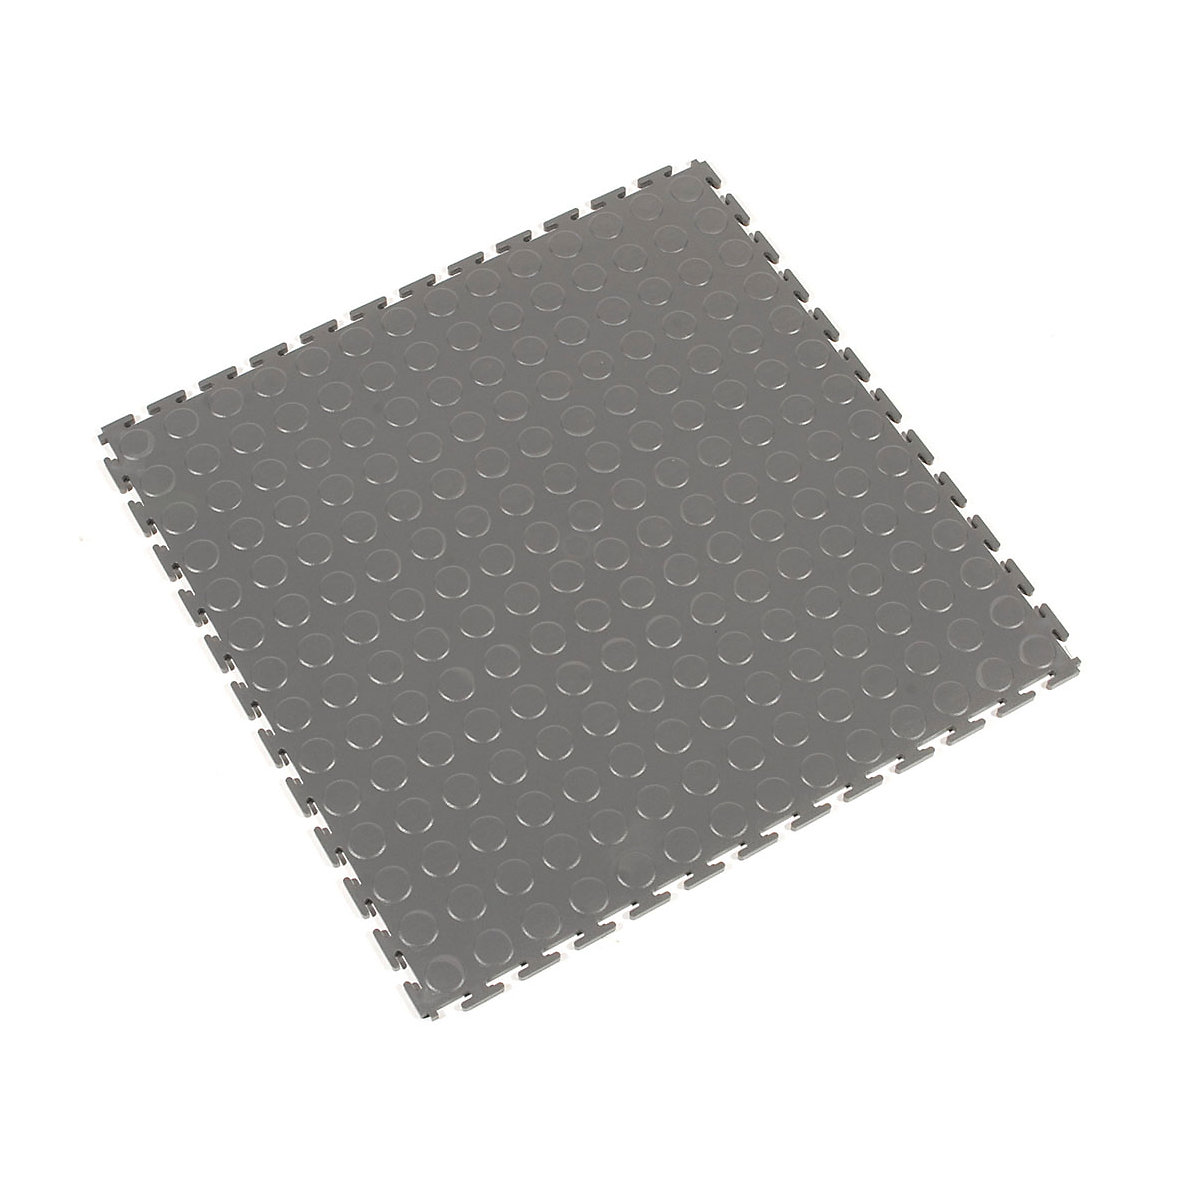 Tough-Lock PVC floor tiles, with studded surface, pack of 8, grey